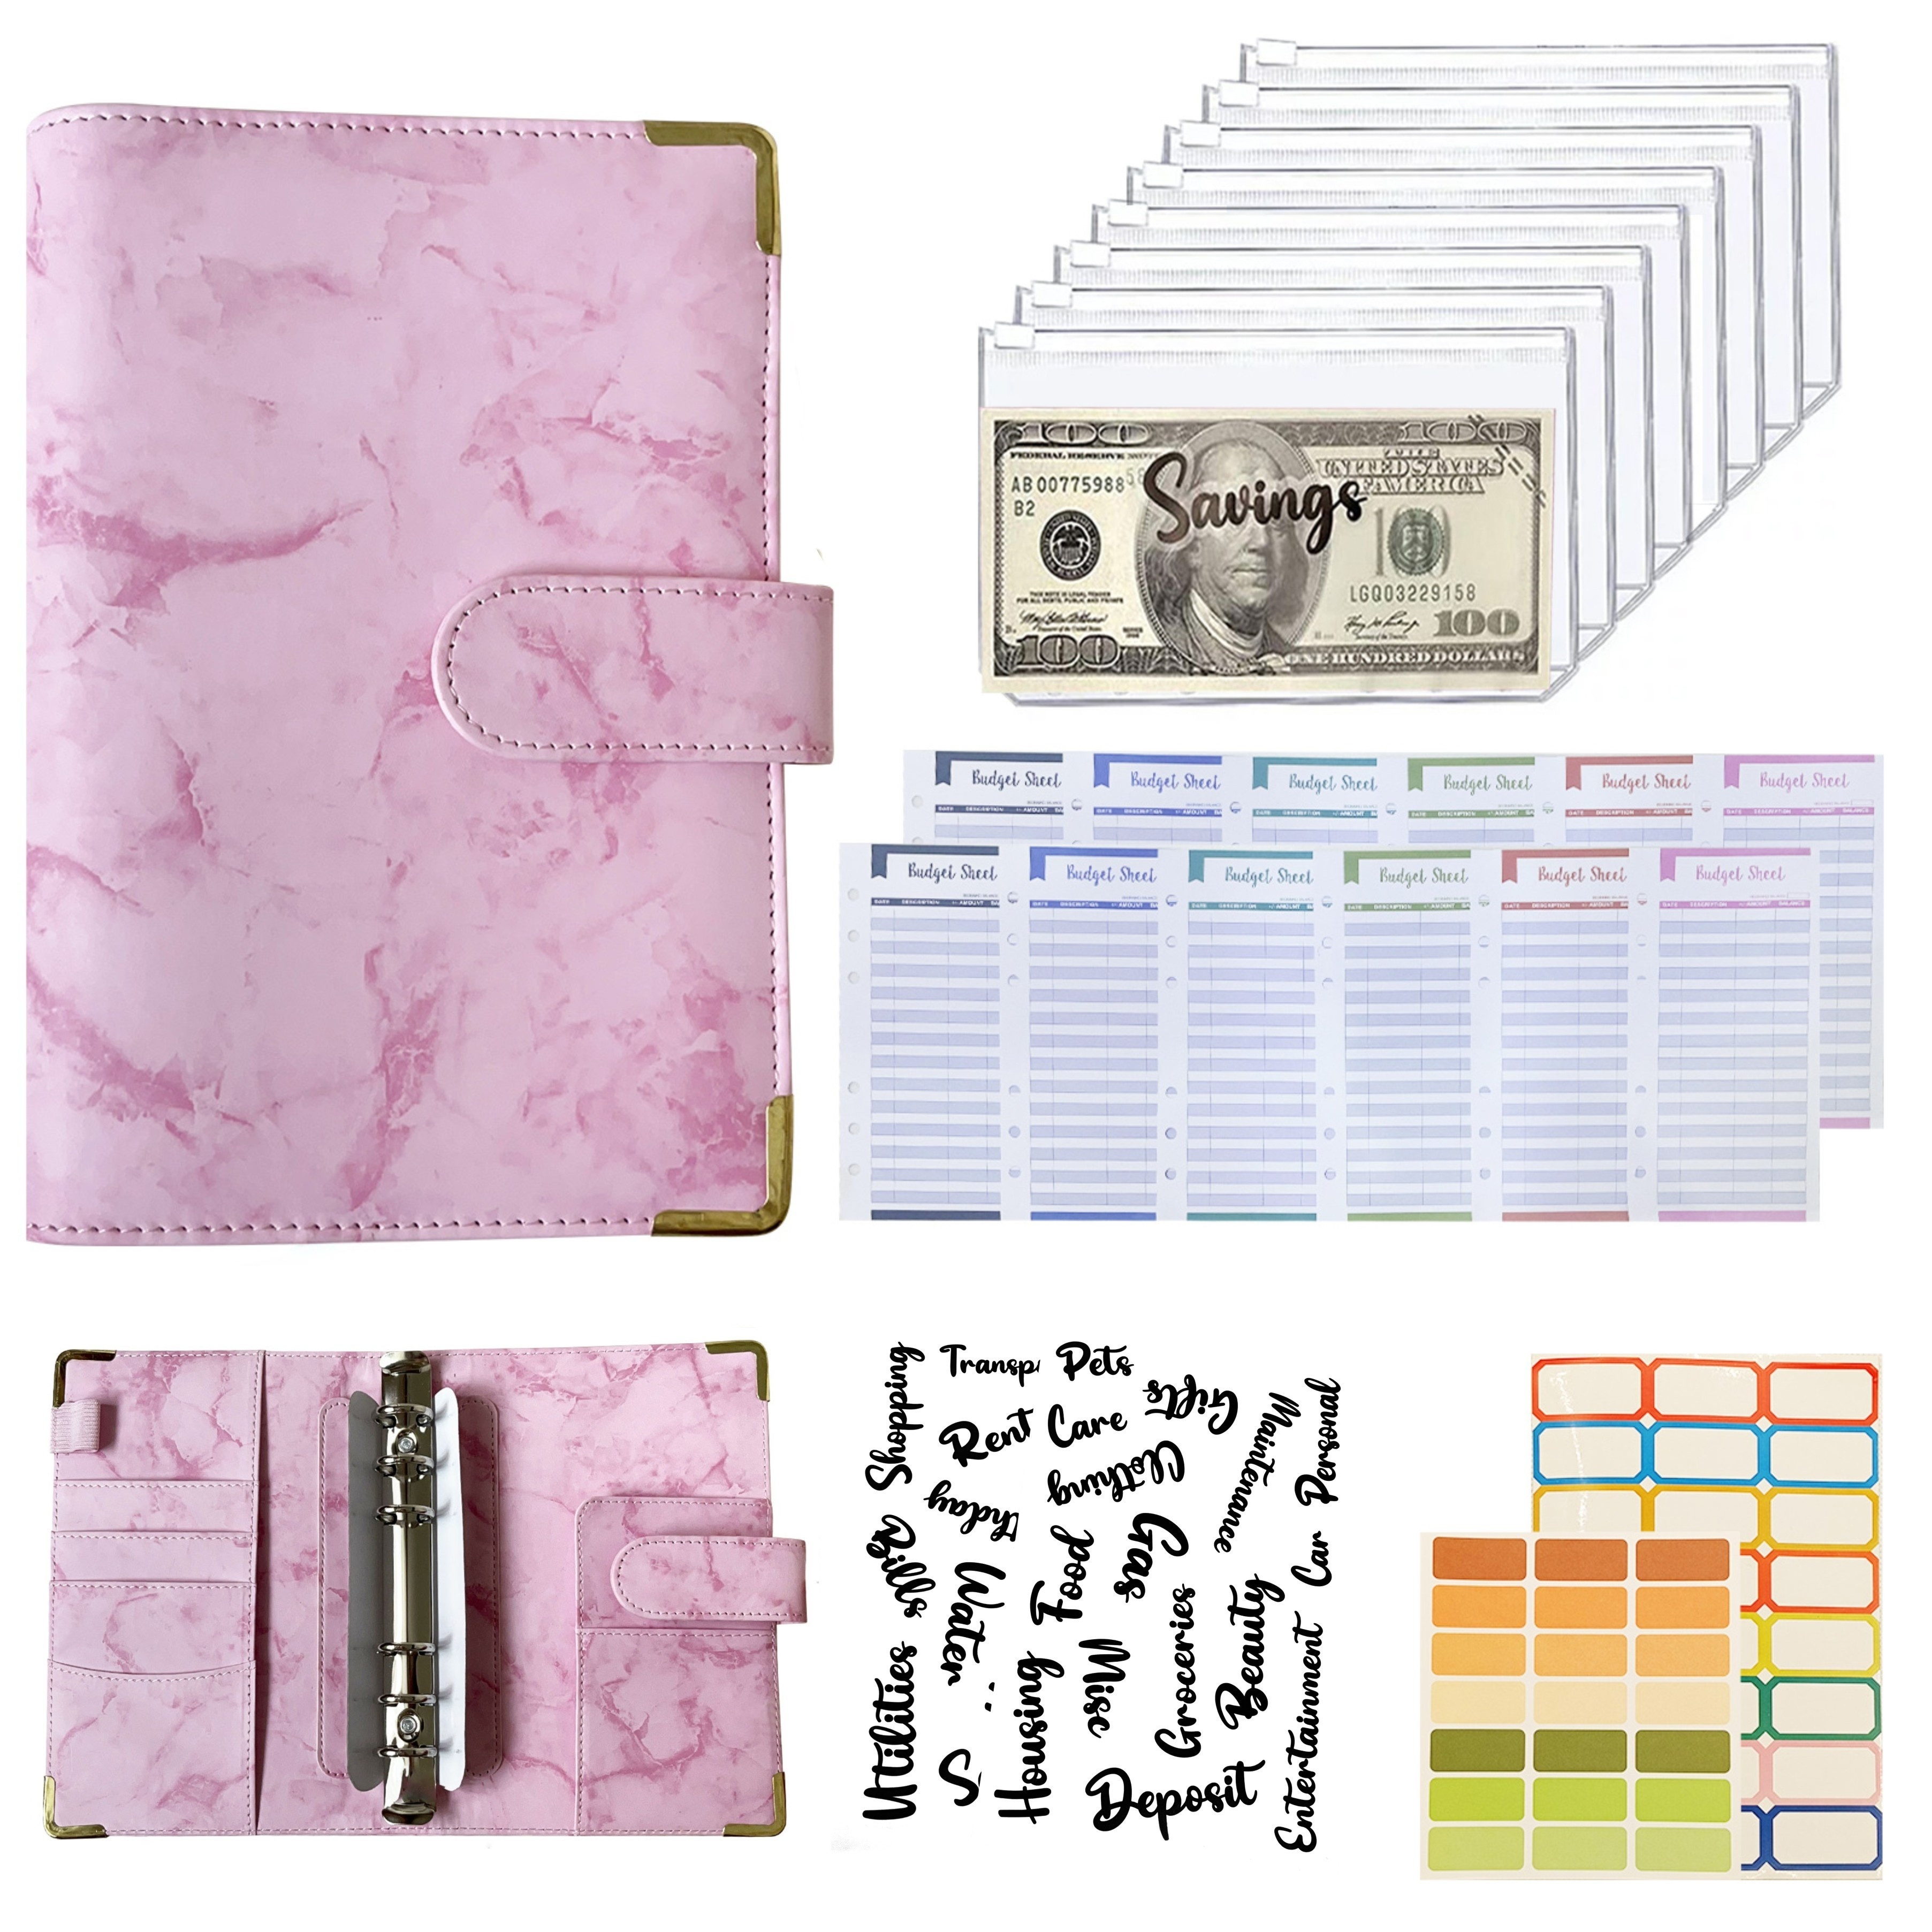 A7 Budget Binder Set - Mini Money Organizer for Cash Saving, Stuffing  Envelope System with Binder Pockets, Sheets and Stickers - AliExpress